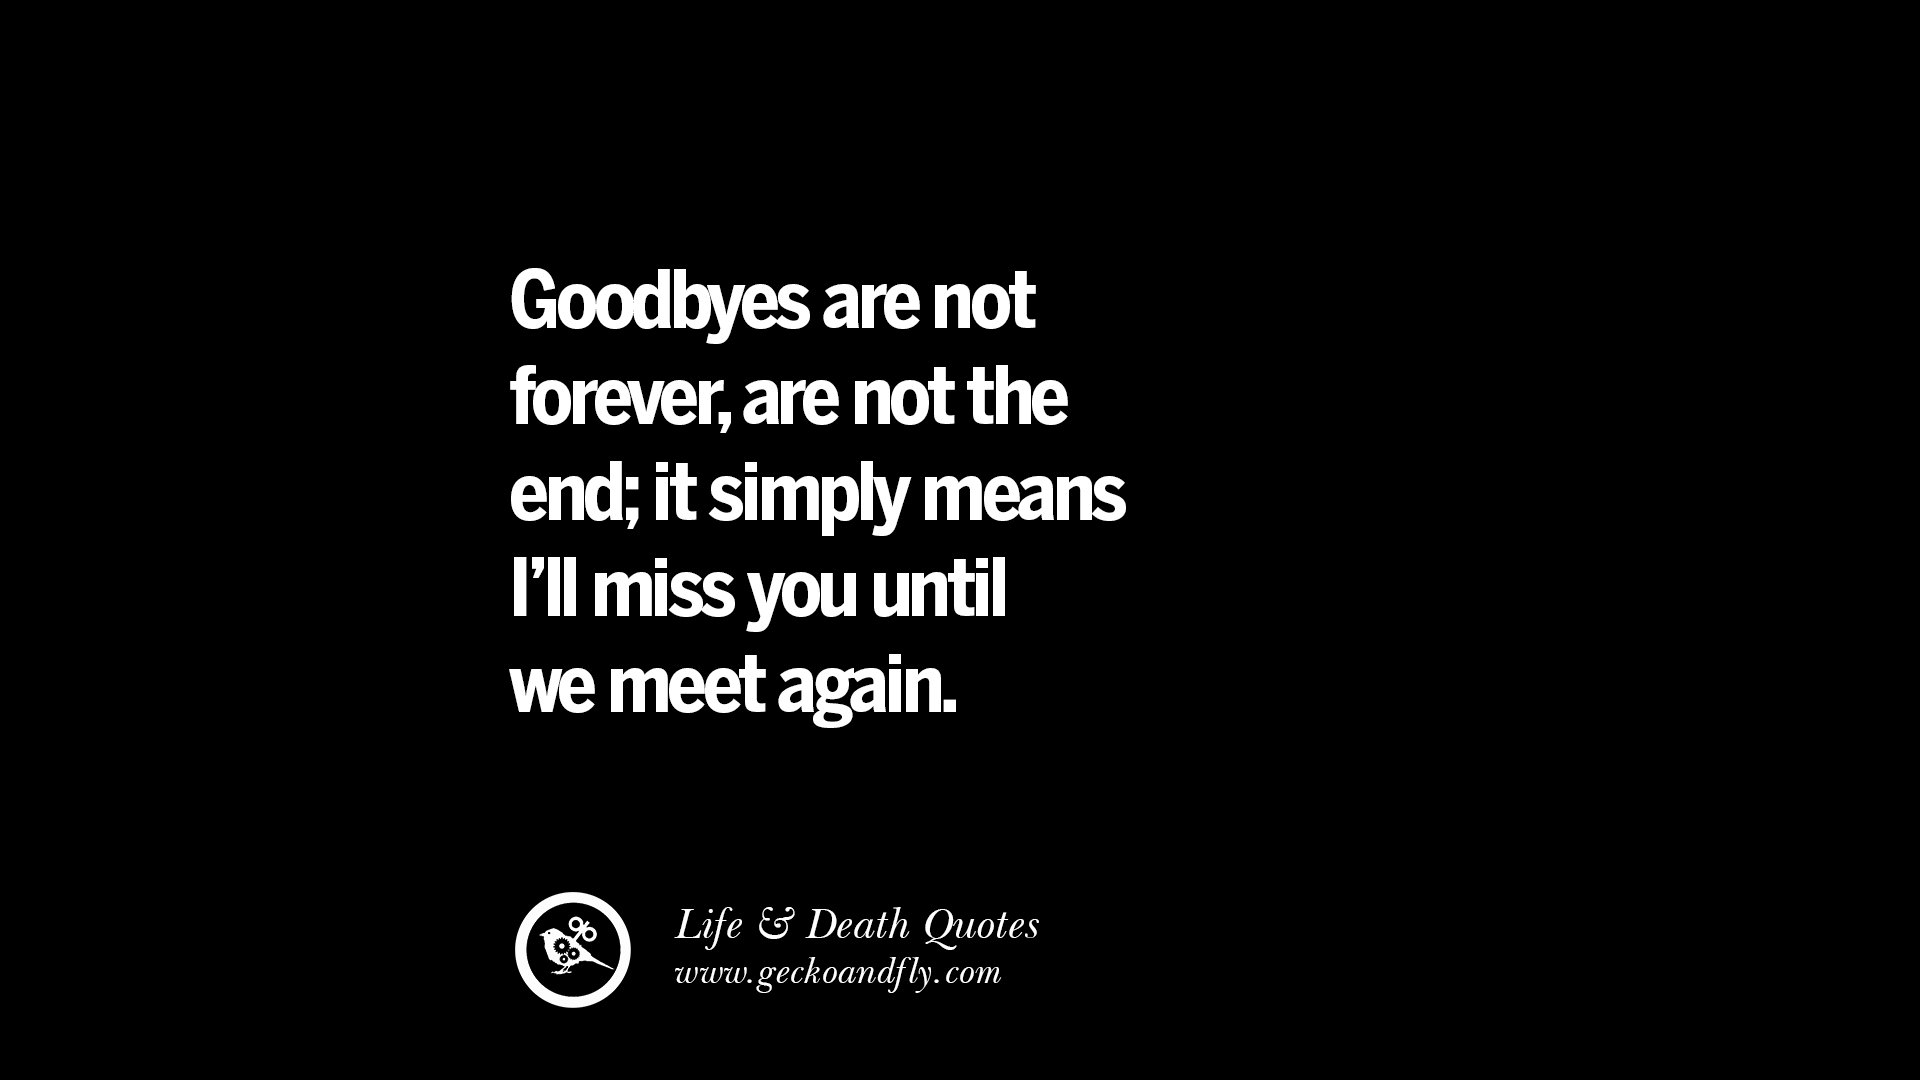 Endings quotes goodbyes about and 101 Best